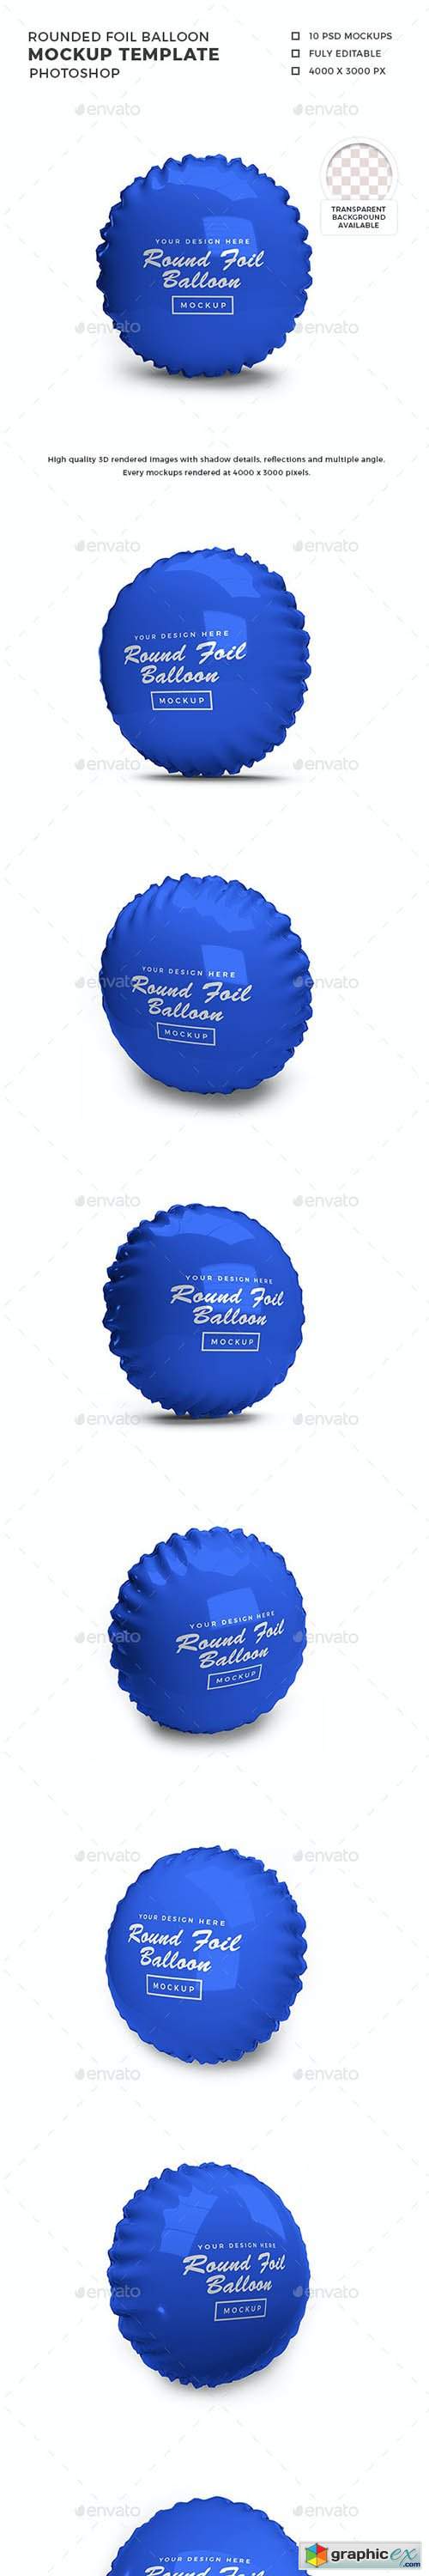 Rounded Foil Balloon 3D Mockup Template 